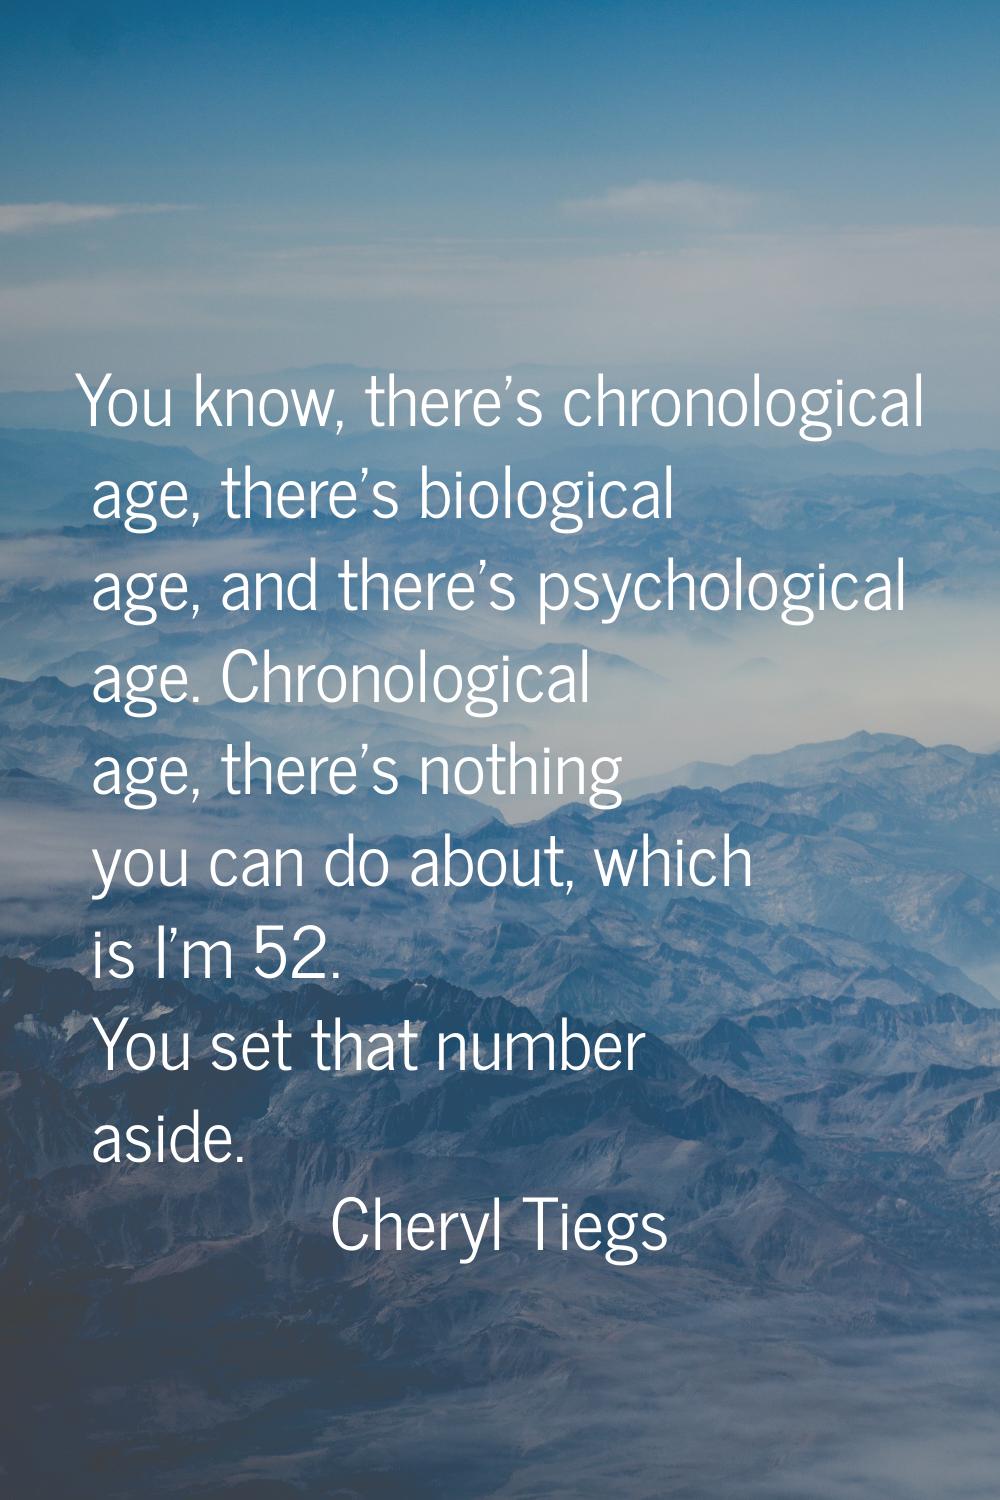 You know, there's chronological age, there's biological age, and there's psychological age. Chronol